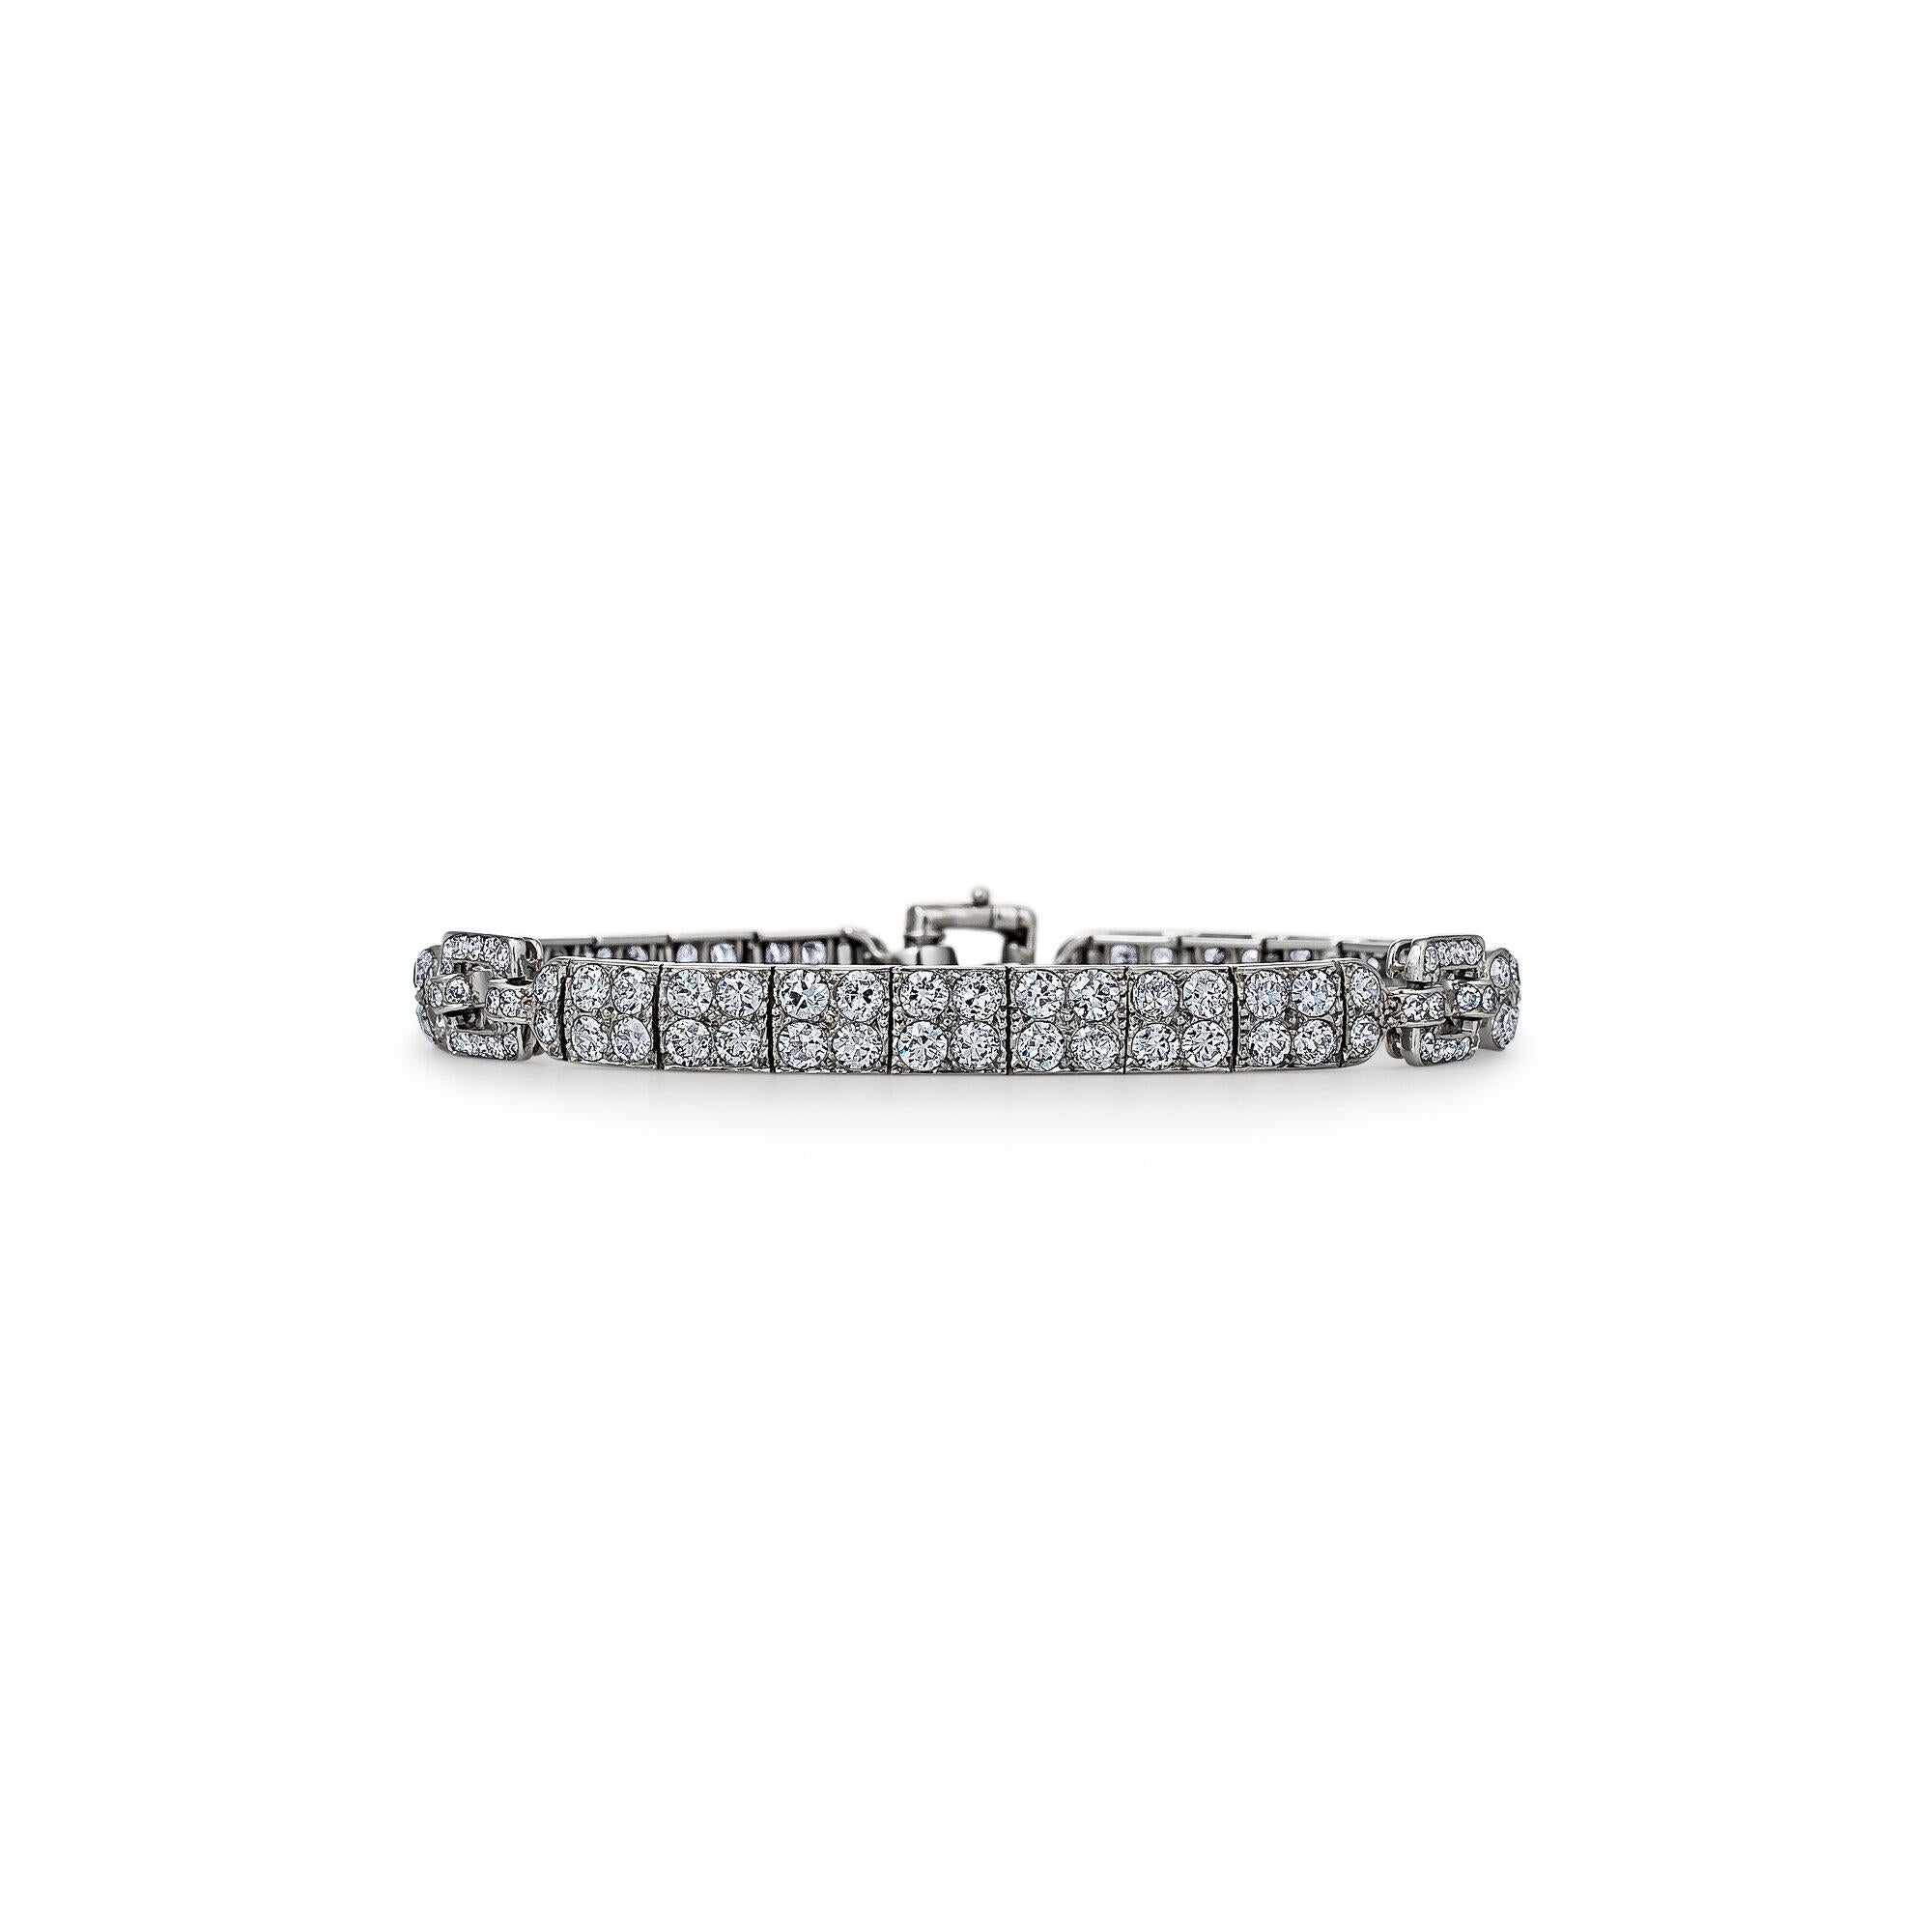 Wearable everyday, this Art Deco diamond platinum bracelet has a powerful timeless spirit and a modern casual feel.  With a total of approximately 6.75 carats of shimmering single cut round diamonds, this collectible bracelet was designed with a